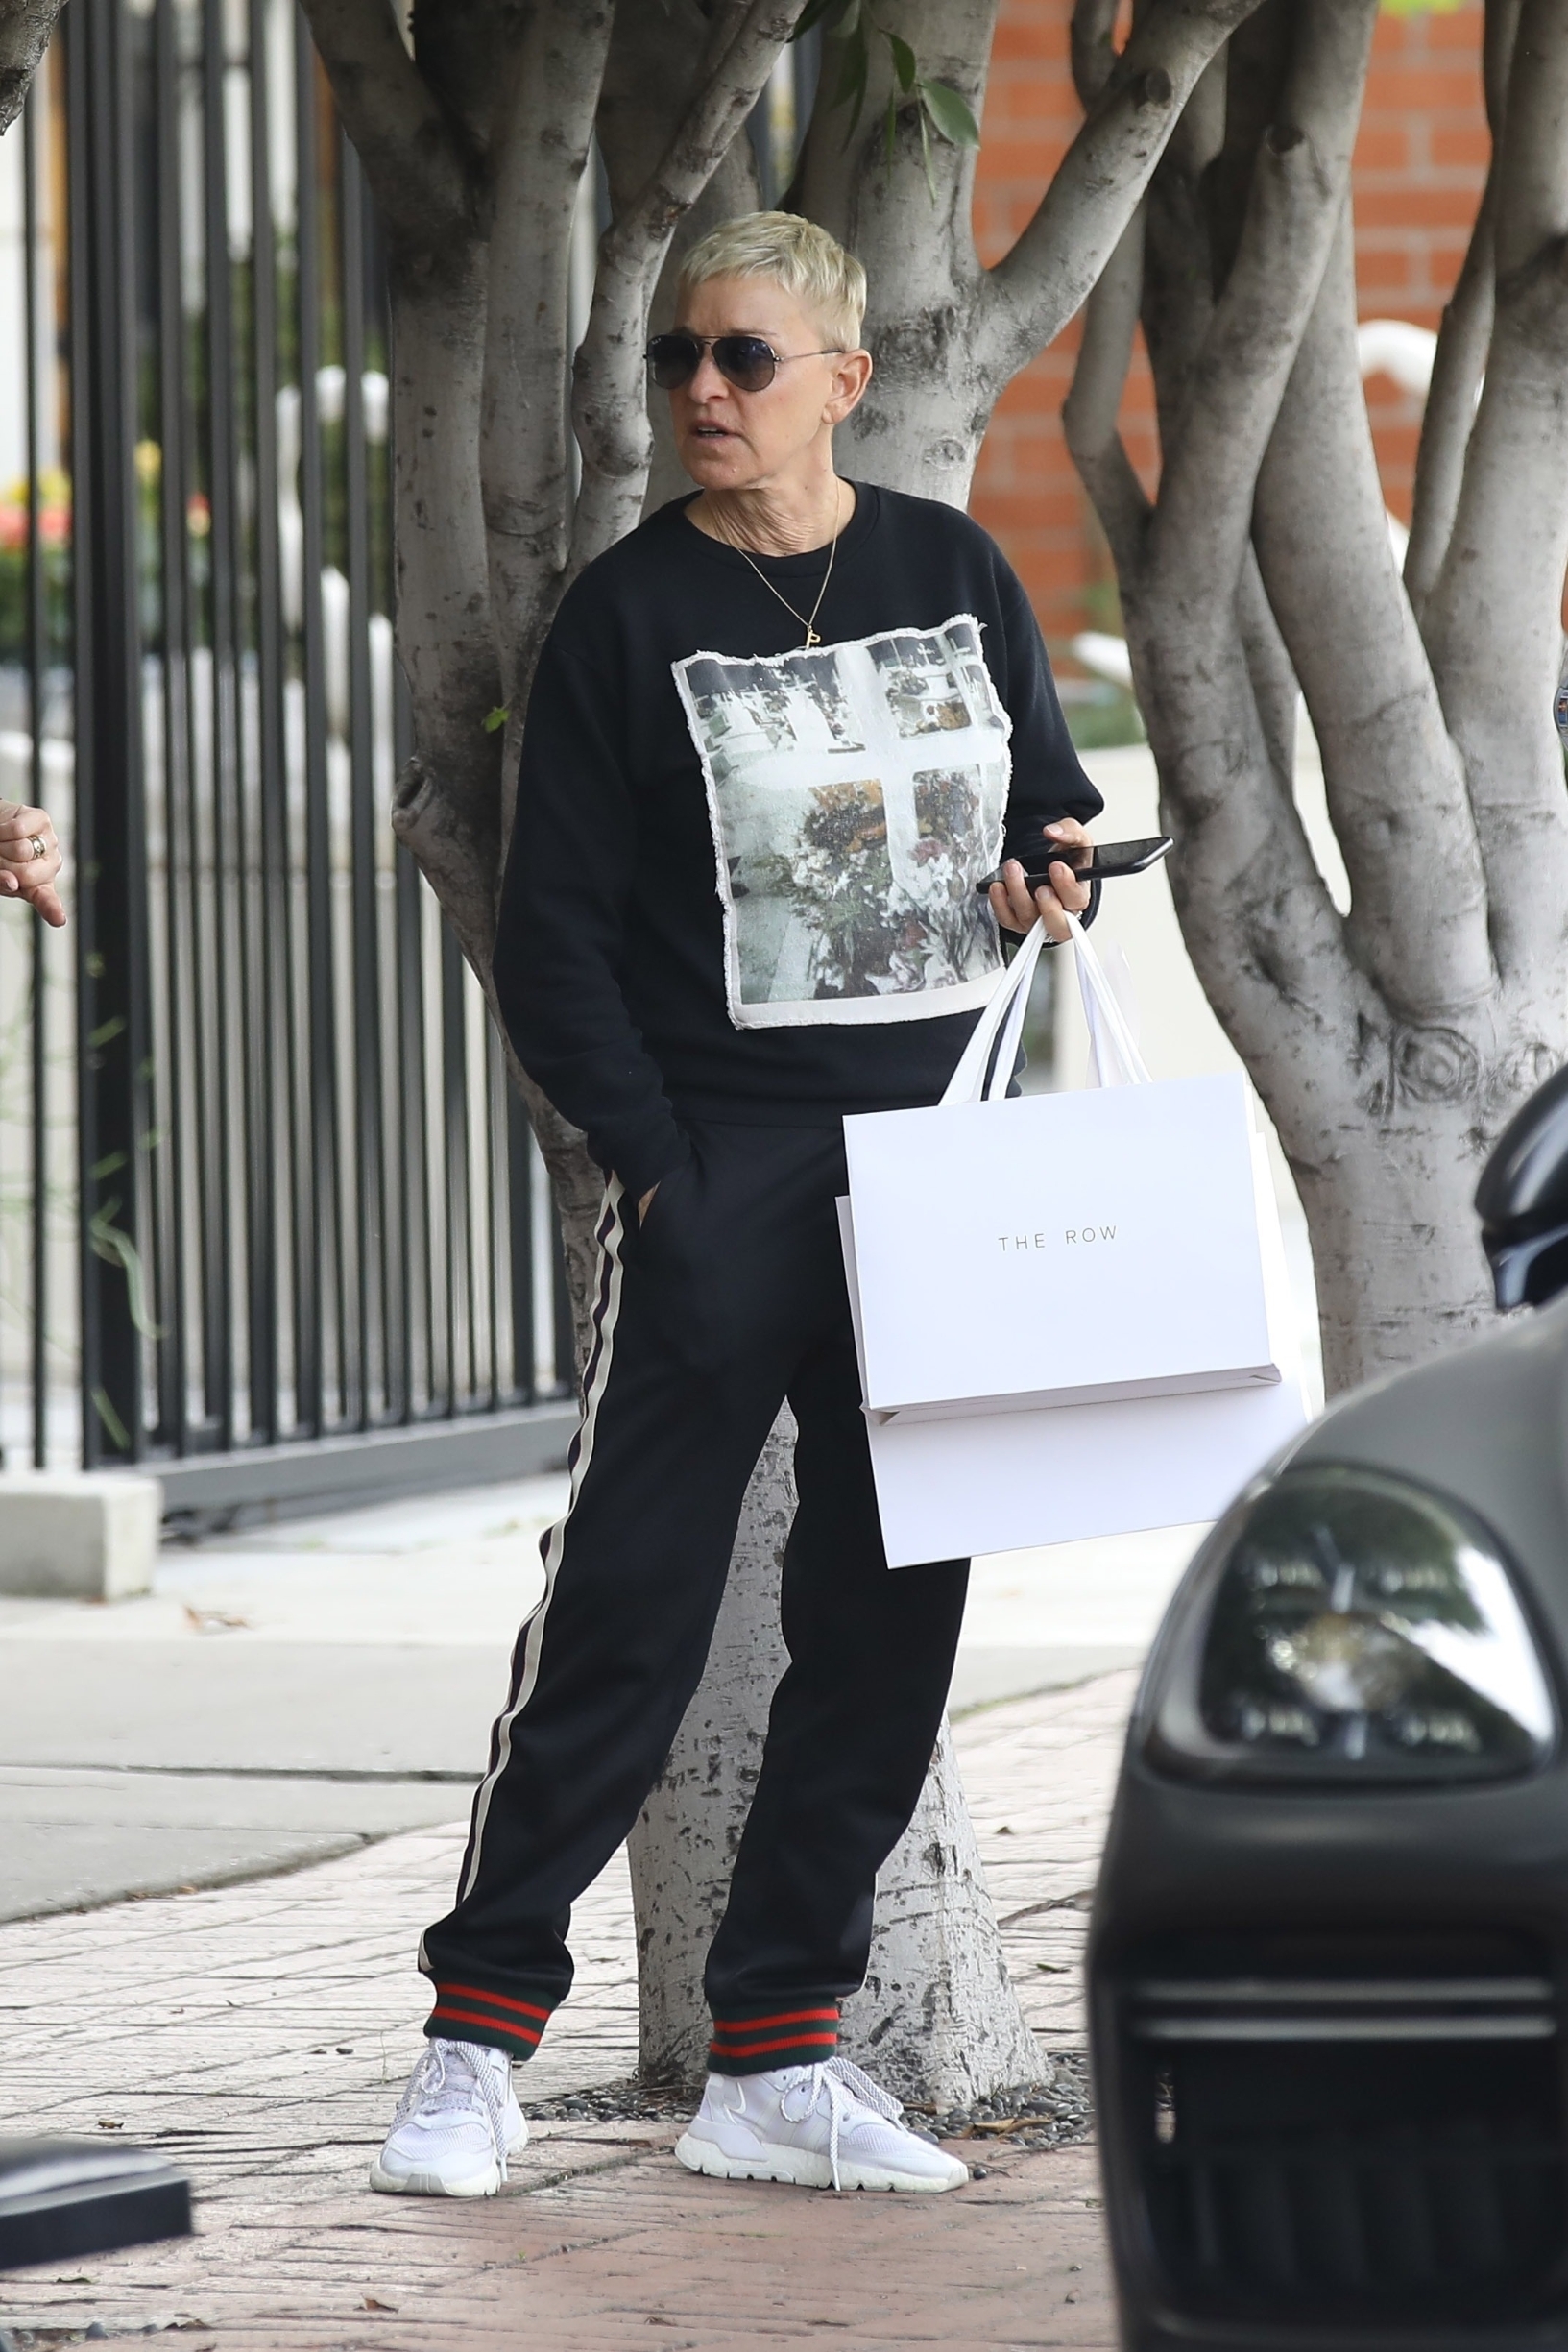 West Hollywood, CA  - Ellen Degeneres is out at Melrose Place treating herself to some shopping at The Row.

BACKGRID USA 30 JANUARY 2020,Image: 495661035, License: Rights-managed, Restrictions: , Model Release: no, Credit line: Vasquez-Max Lopes / BACKGRID / Backgrid USA / Profimedia